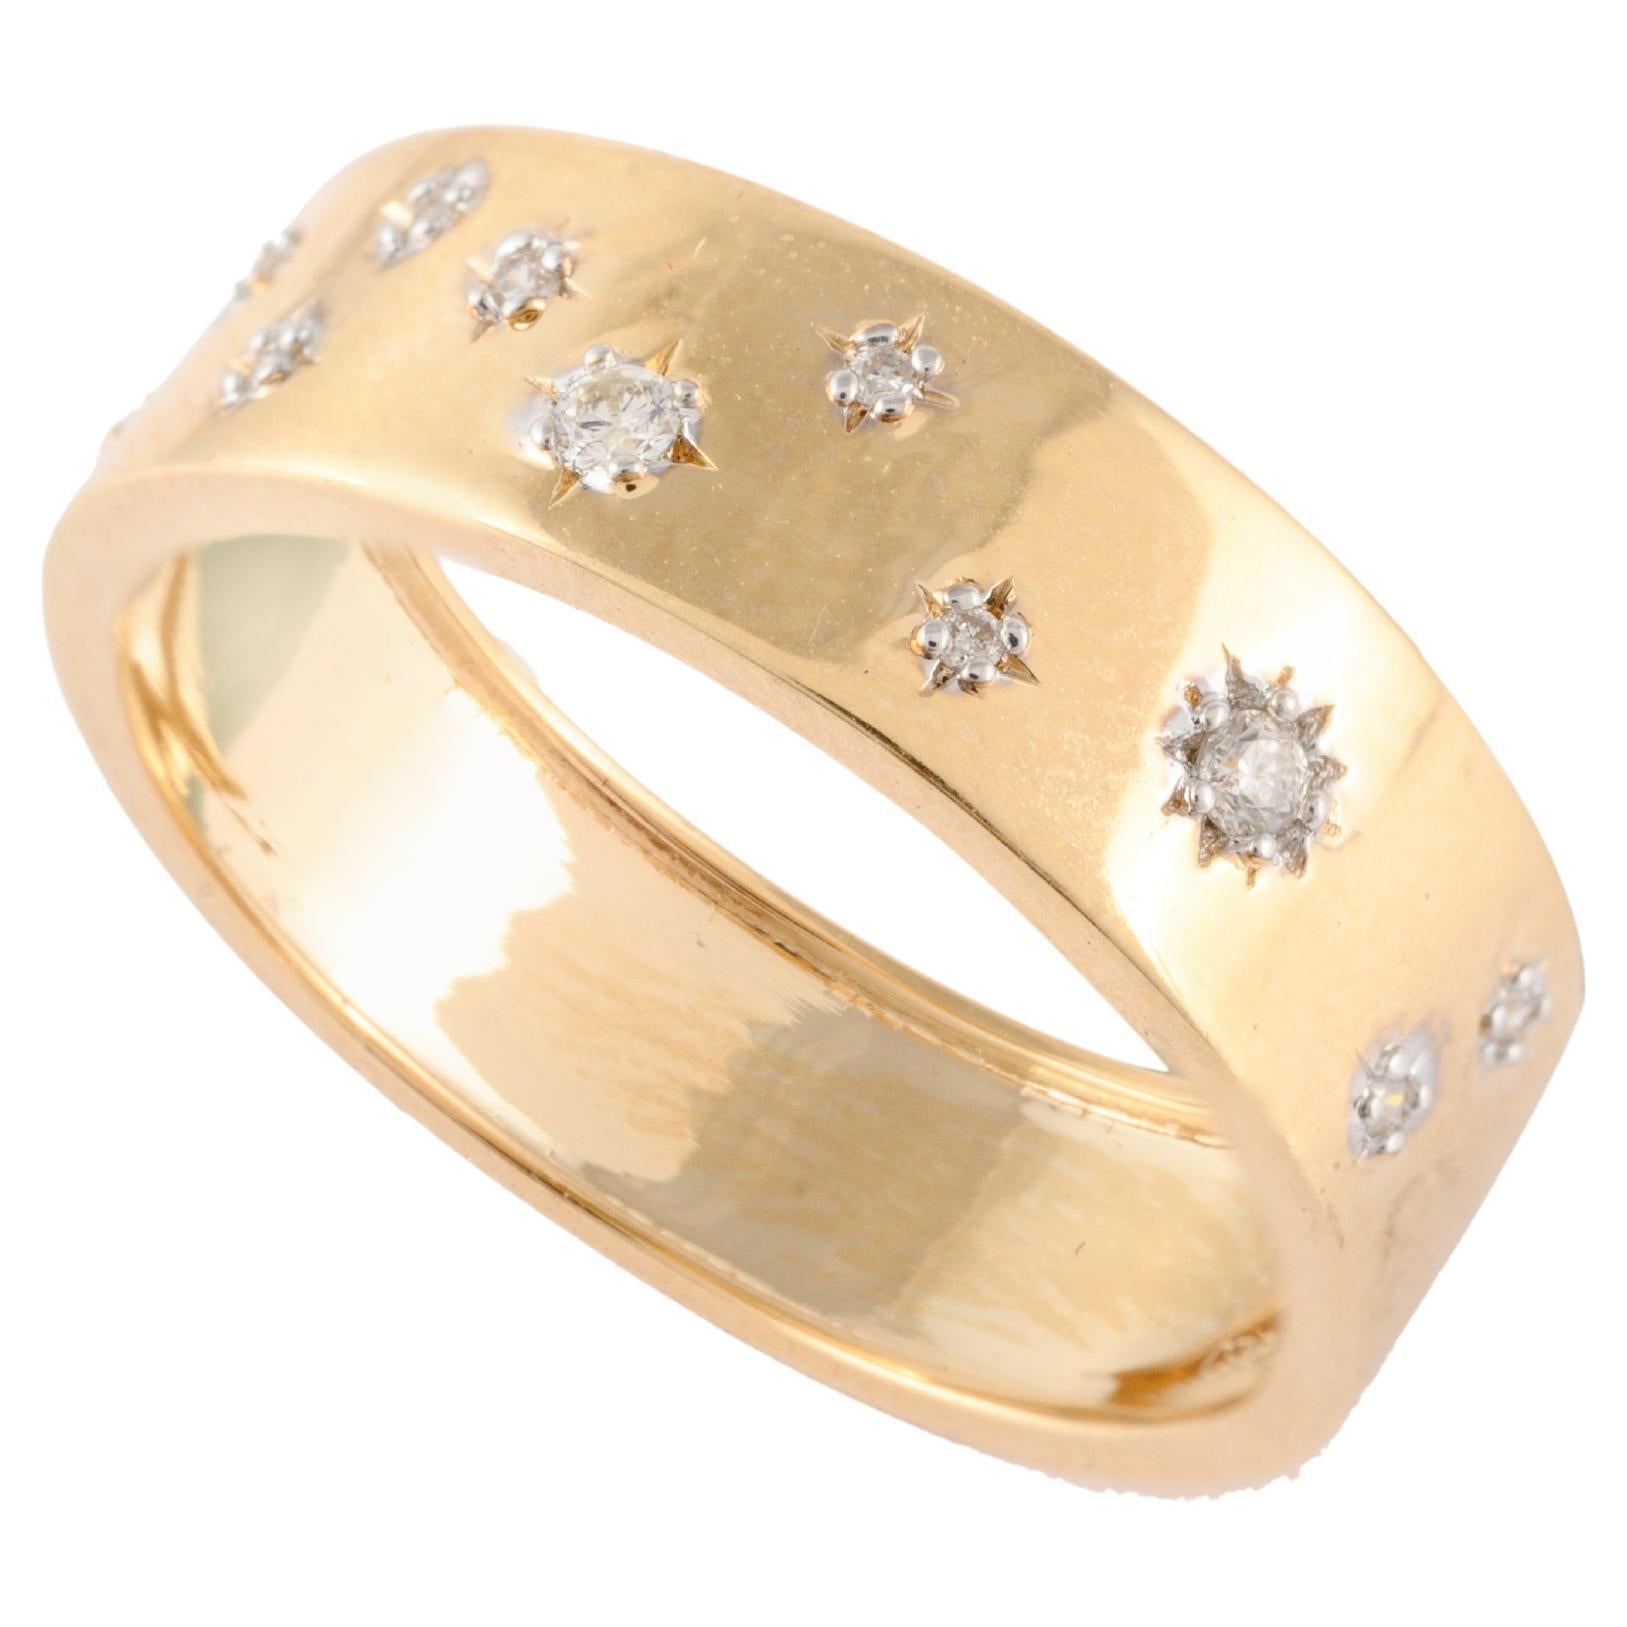 Genuine Diamond Stardust Astral Unisex Band Ring in 18k Solid Yellow Gold